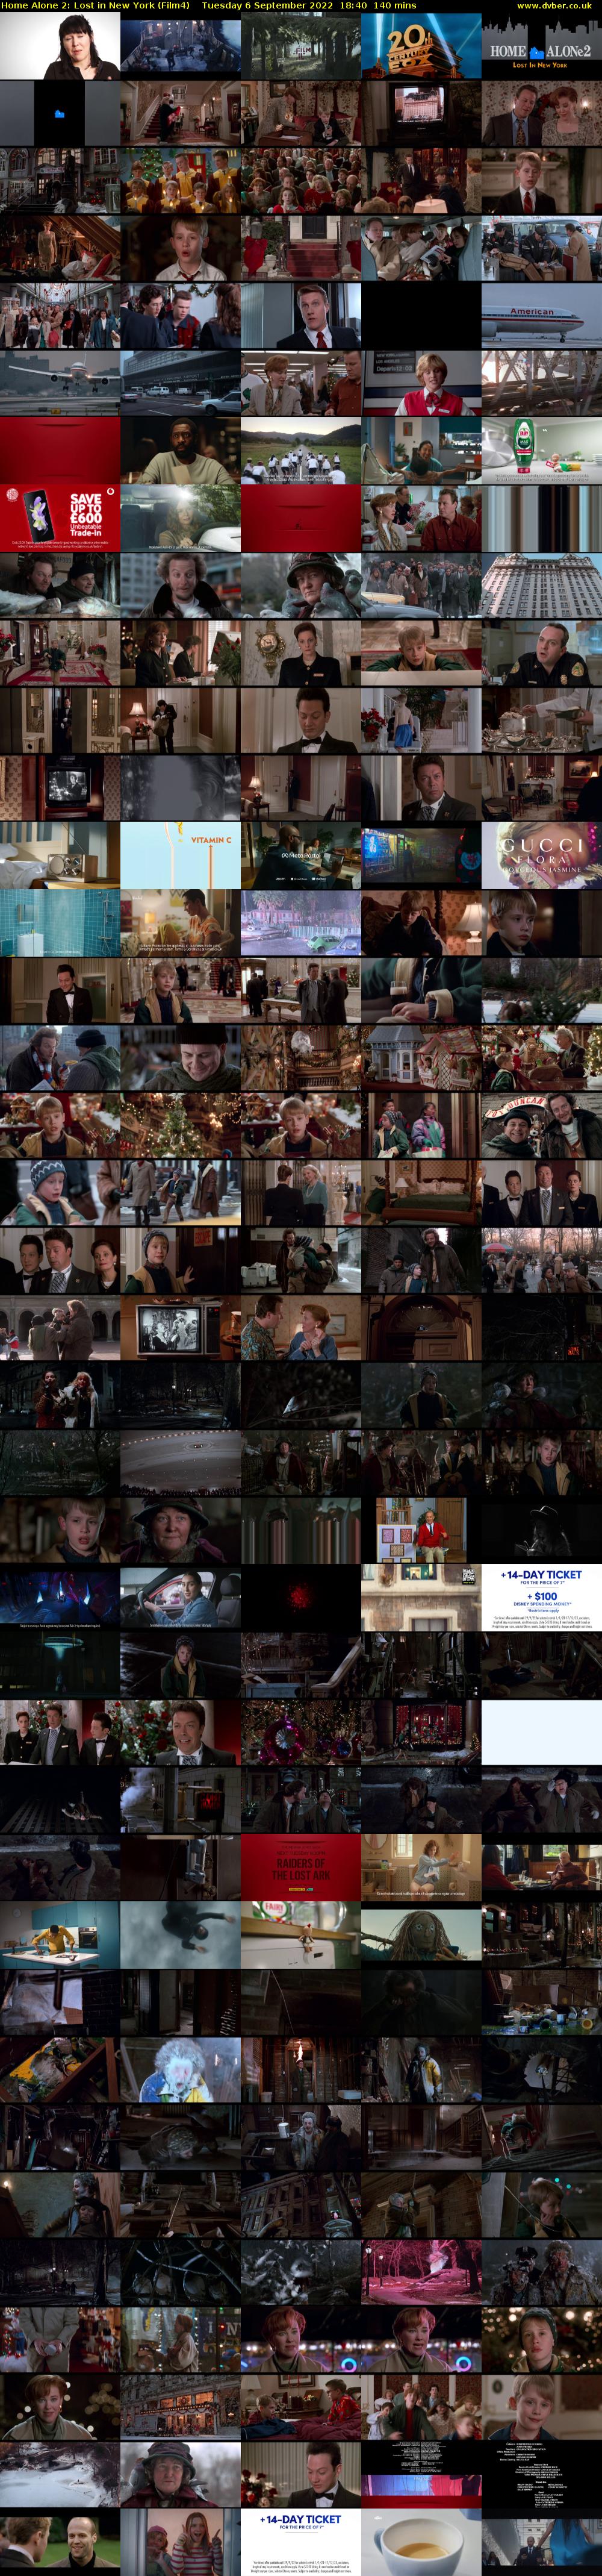 Home Alone 2: Lost in New York (Film4) Tuesday 6 September 2022 18:40 - 21:00